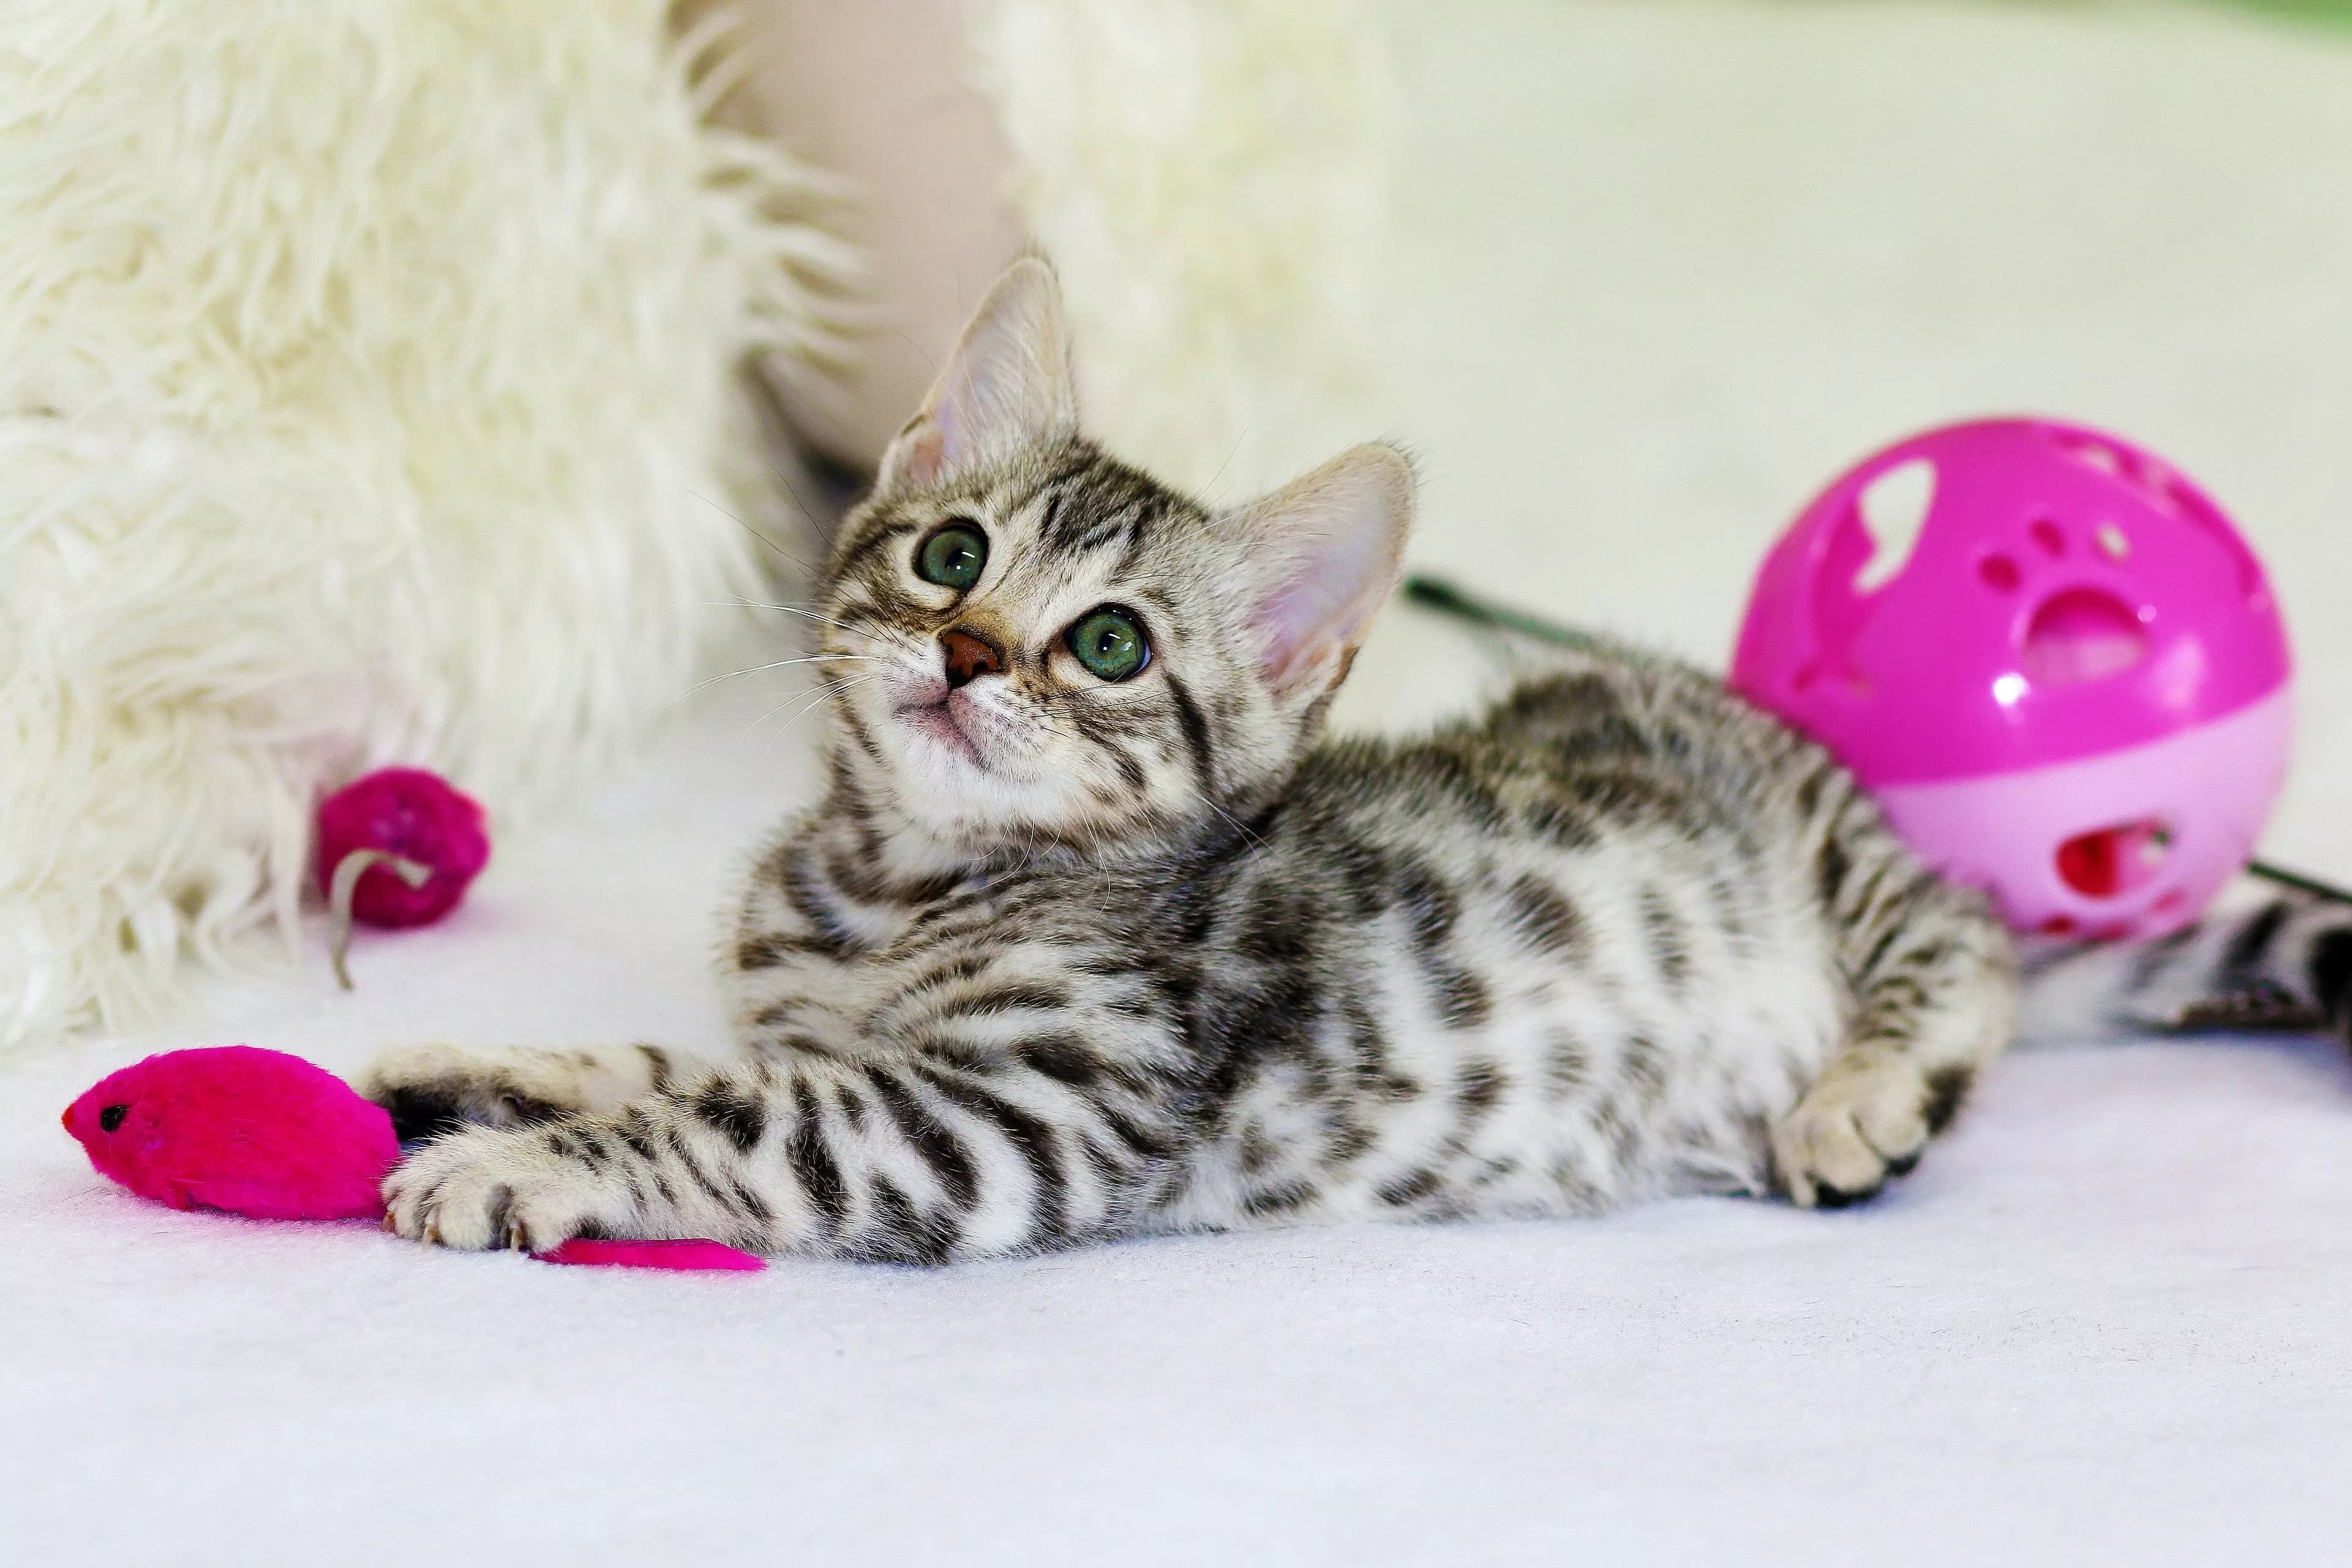 As cute as this kitty is, you probably don't want 17 (